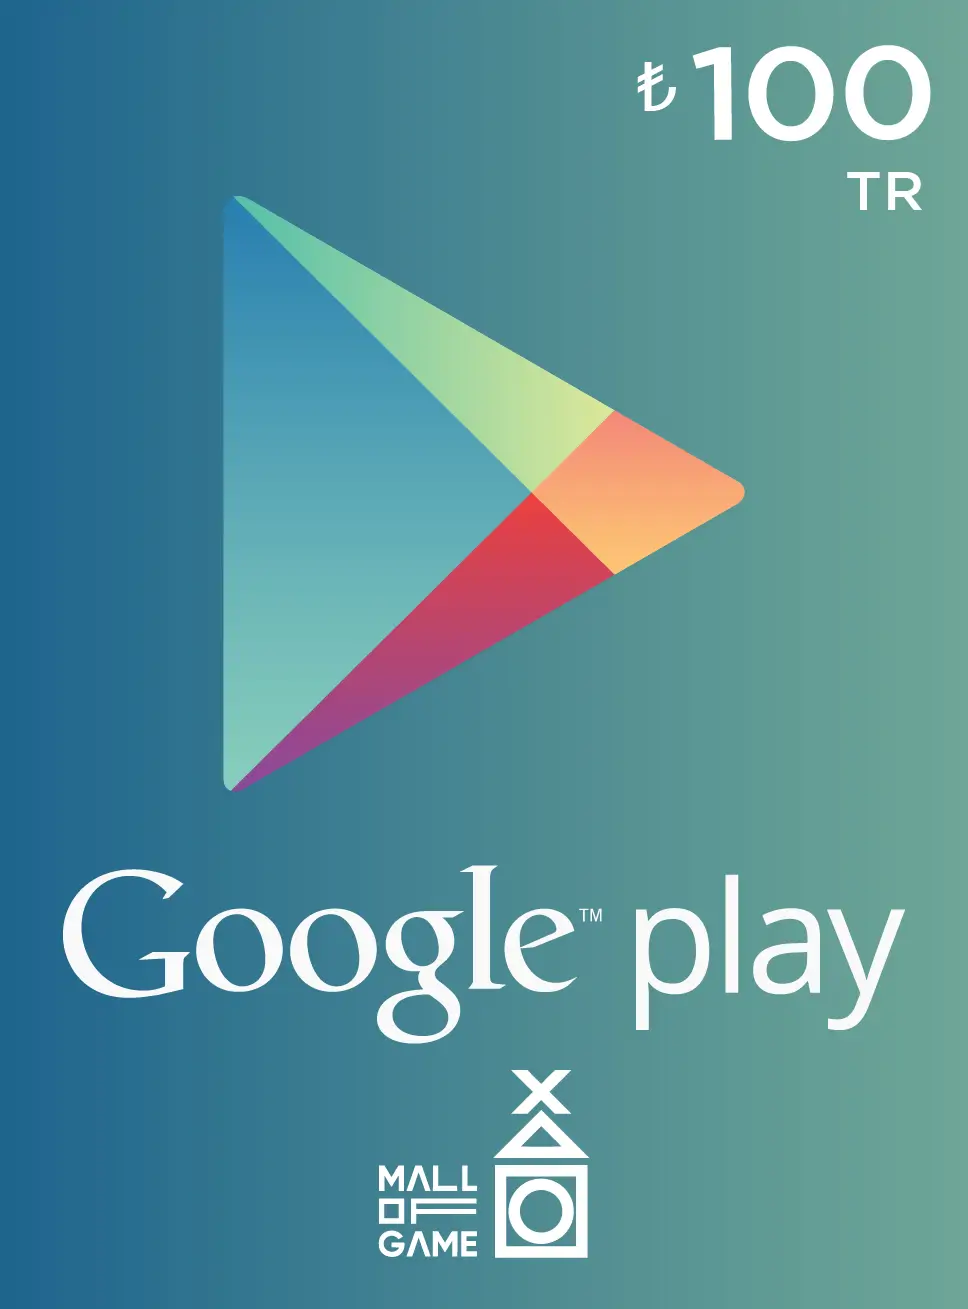 Is there any way to convert my Google Play App Store balance into cash or a gift  card? - Quora